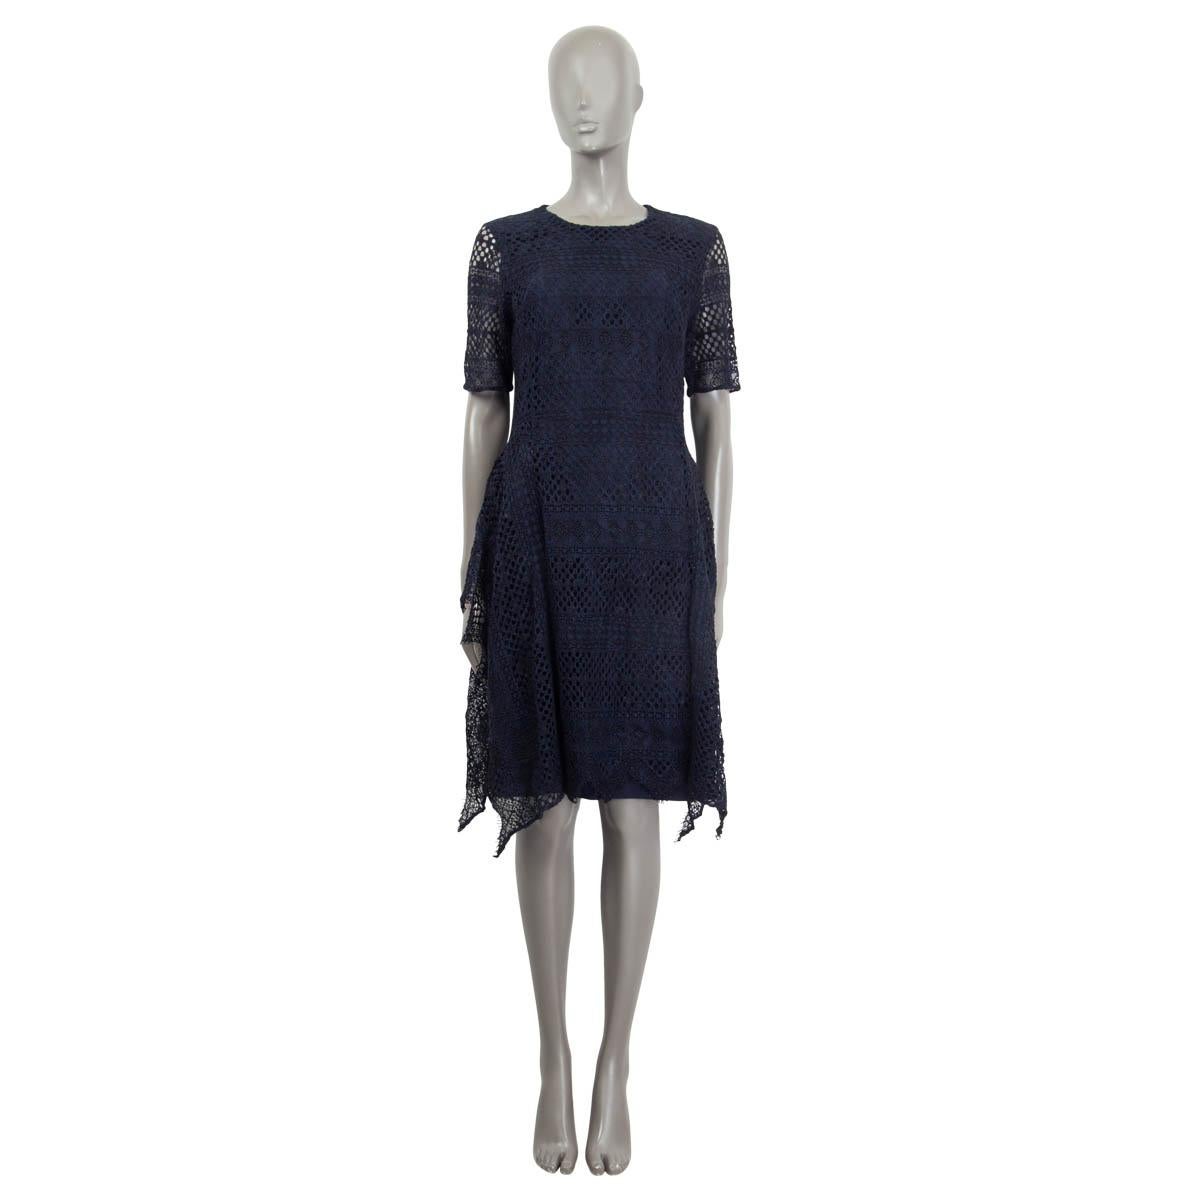 100% authentic Carolina Herrera broderie anglaise dress in navy blue cotton (45%), viscose (28%) and polyamide (27%). Features an asymmetric hemline and short semi sheer sleeves. Opens with a concealed zipper and a hook at the back. Lined in navy